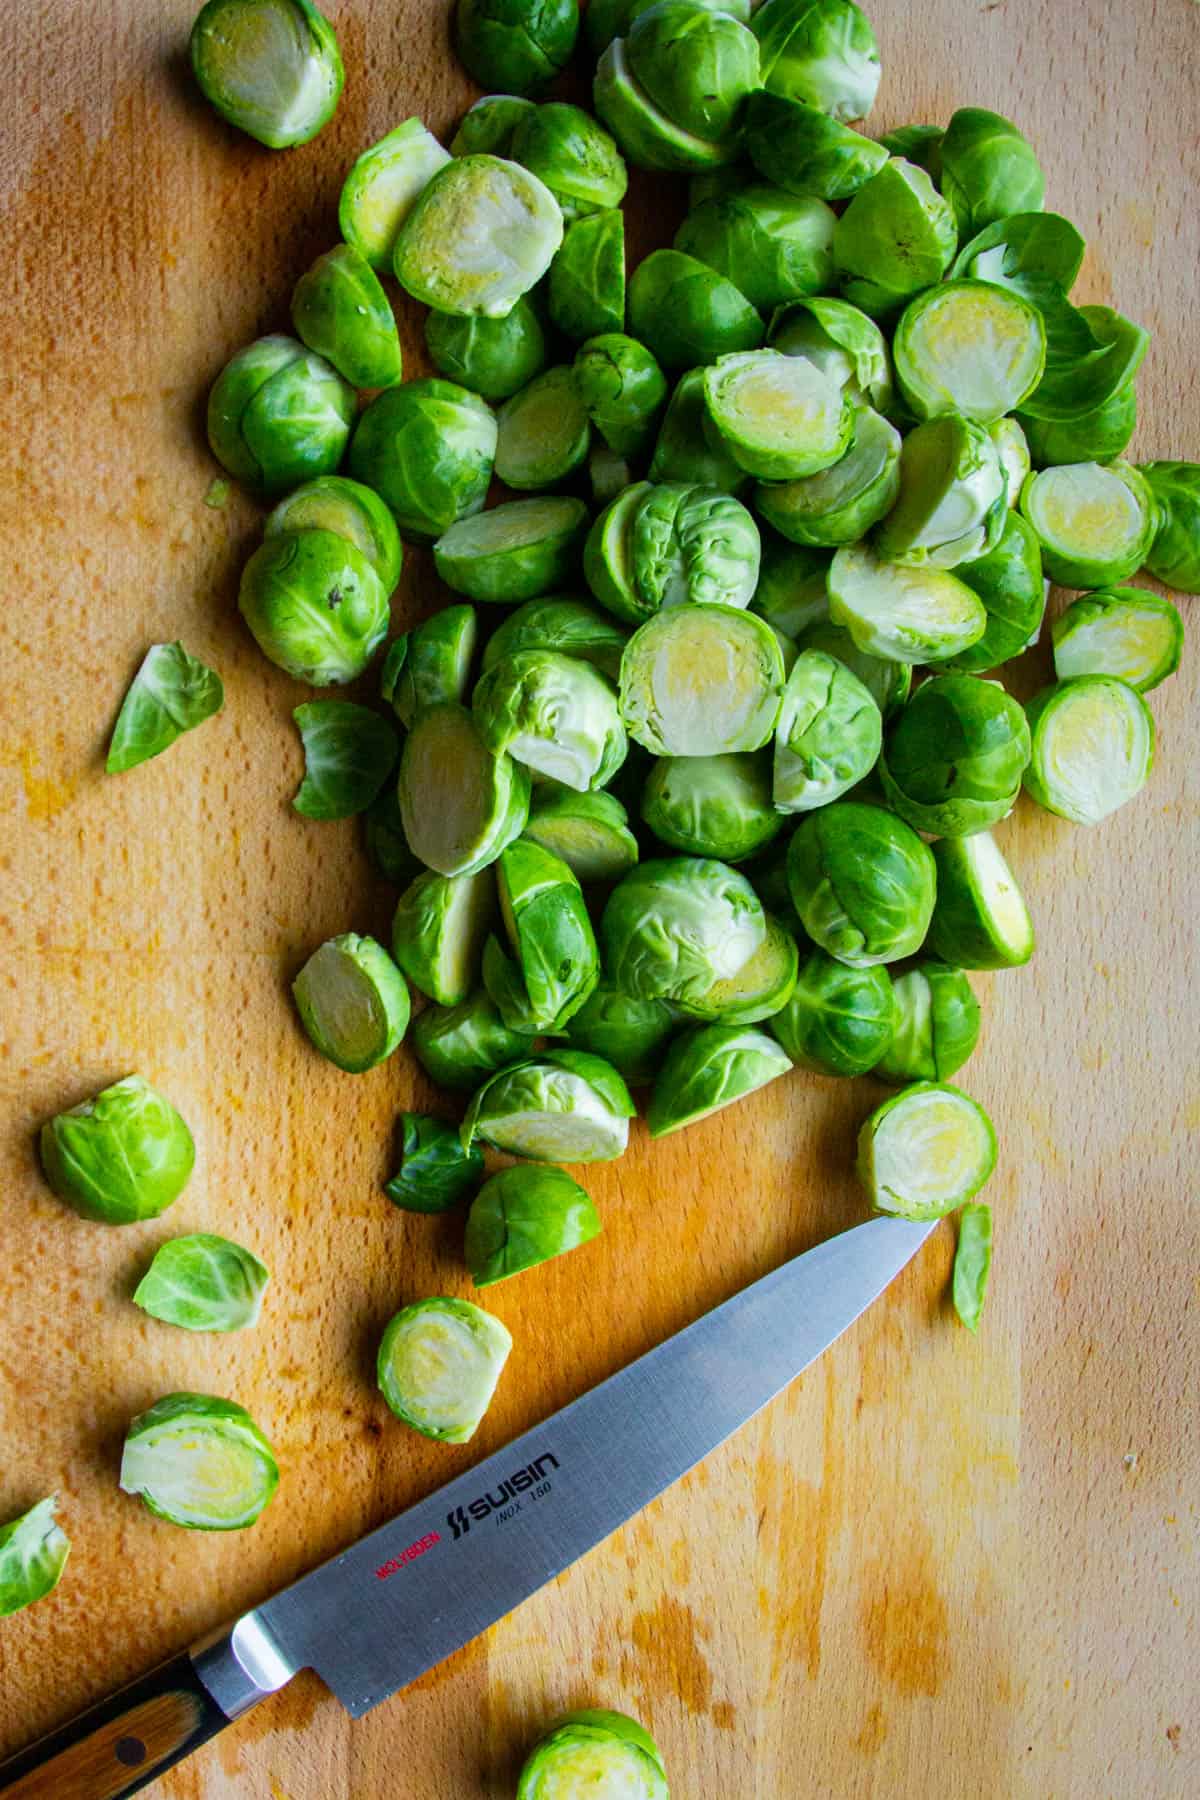 Cutting the brussel sprouts on a wooden board with a knife.